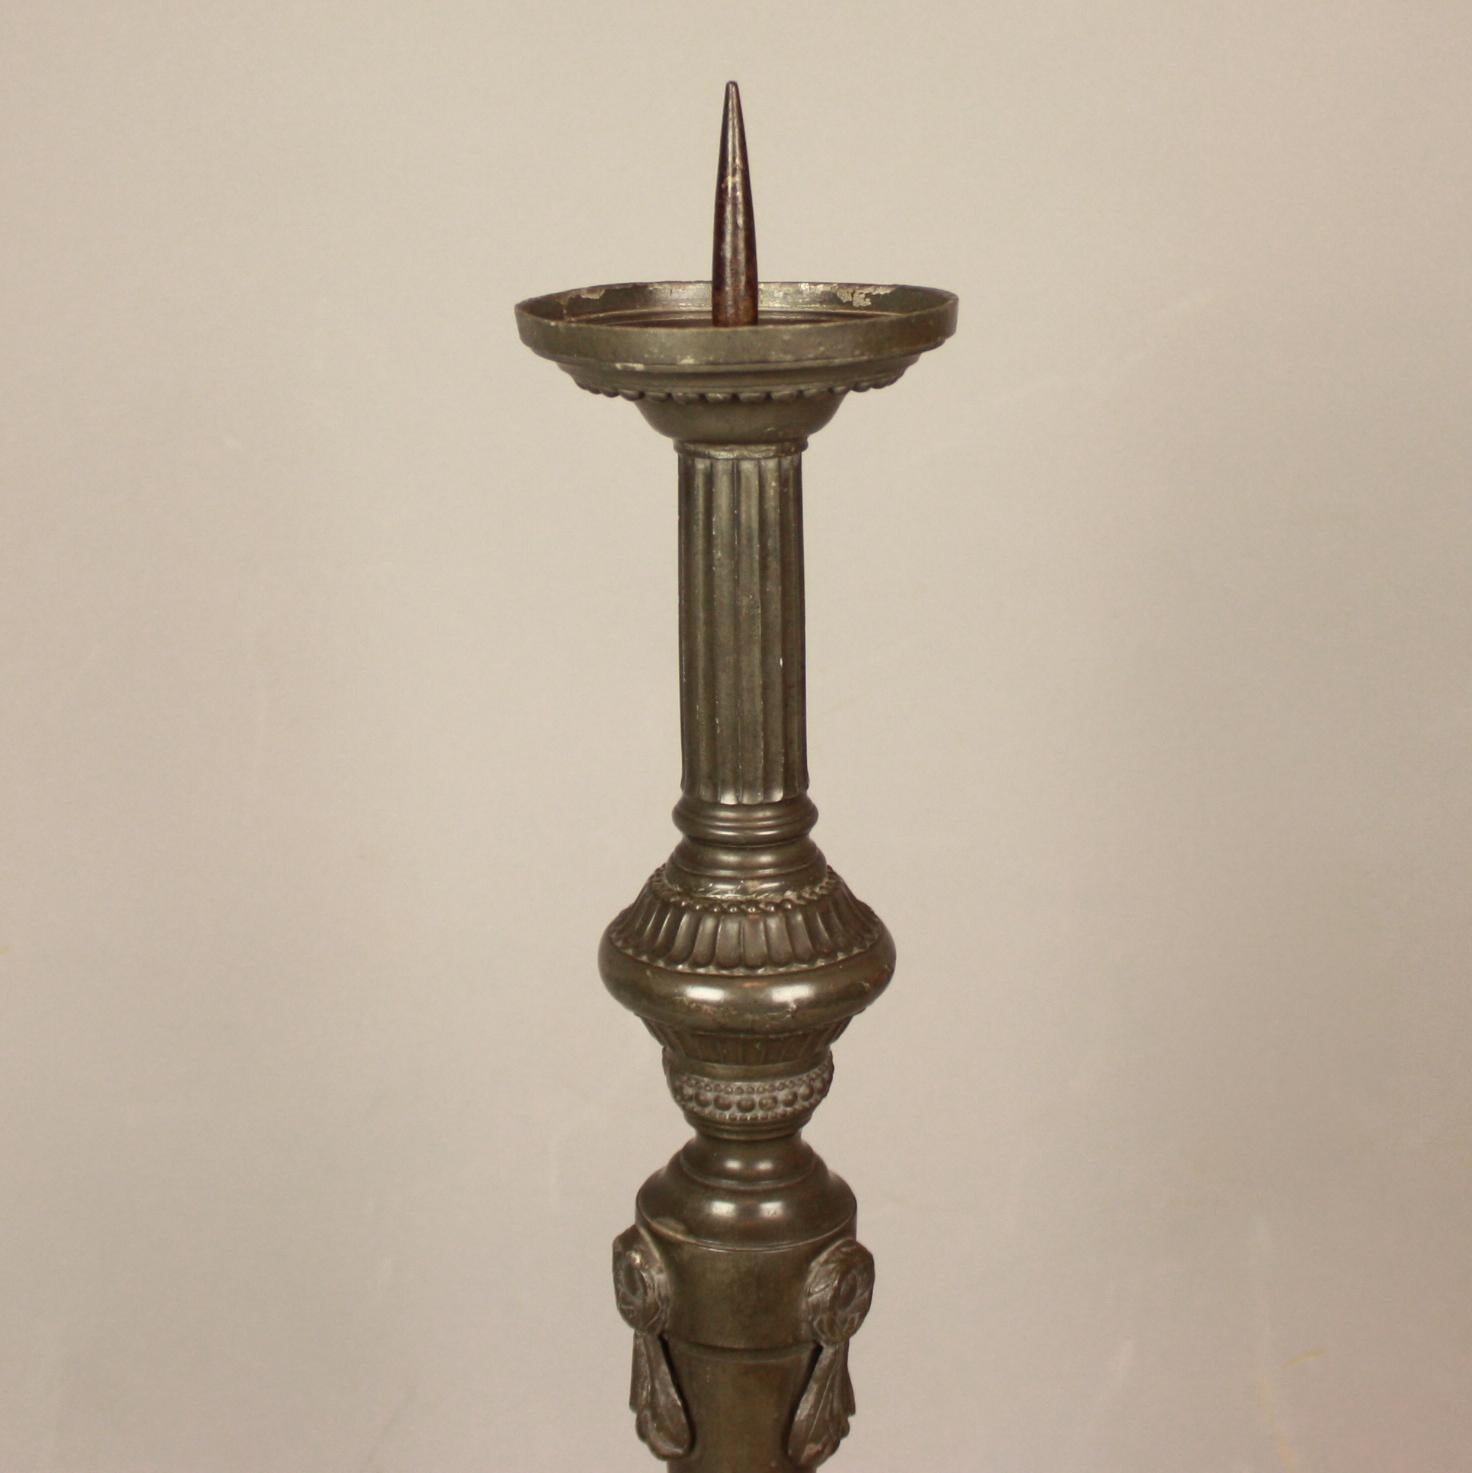 Late 18th Century French Louis XVI large Neoclassical Pewter Altar Candlestick

A late 18th century altar candlestick or orchere decorated with neoclassical motifs including beaded mouldings, wreaths and festoons. Supported on an triangular base,